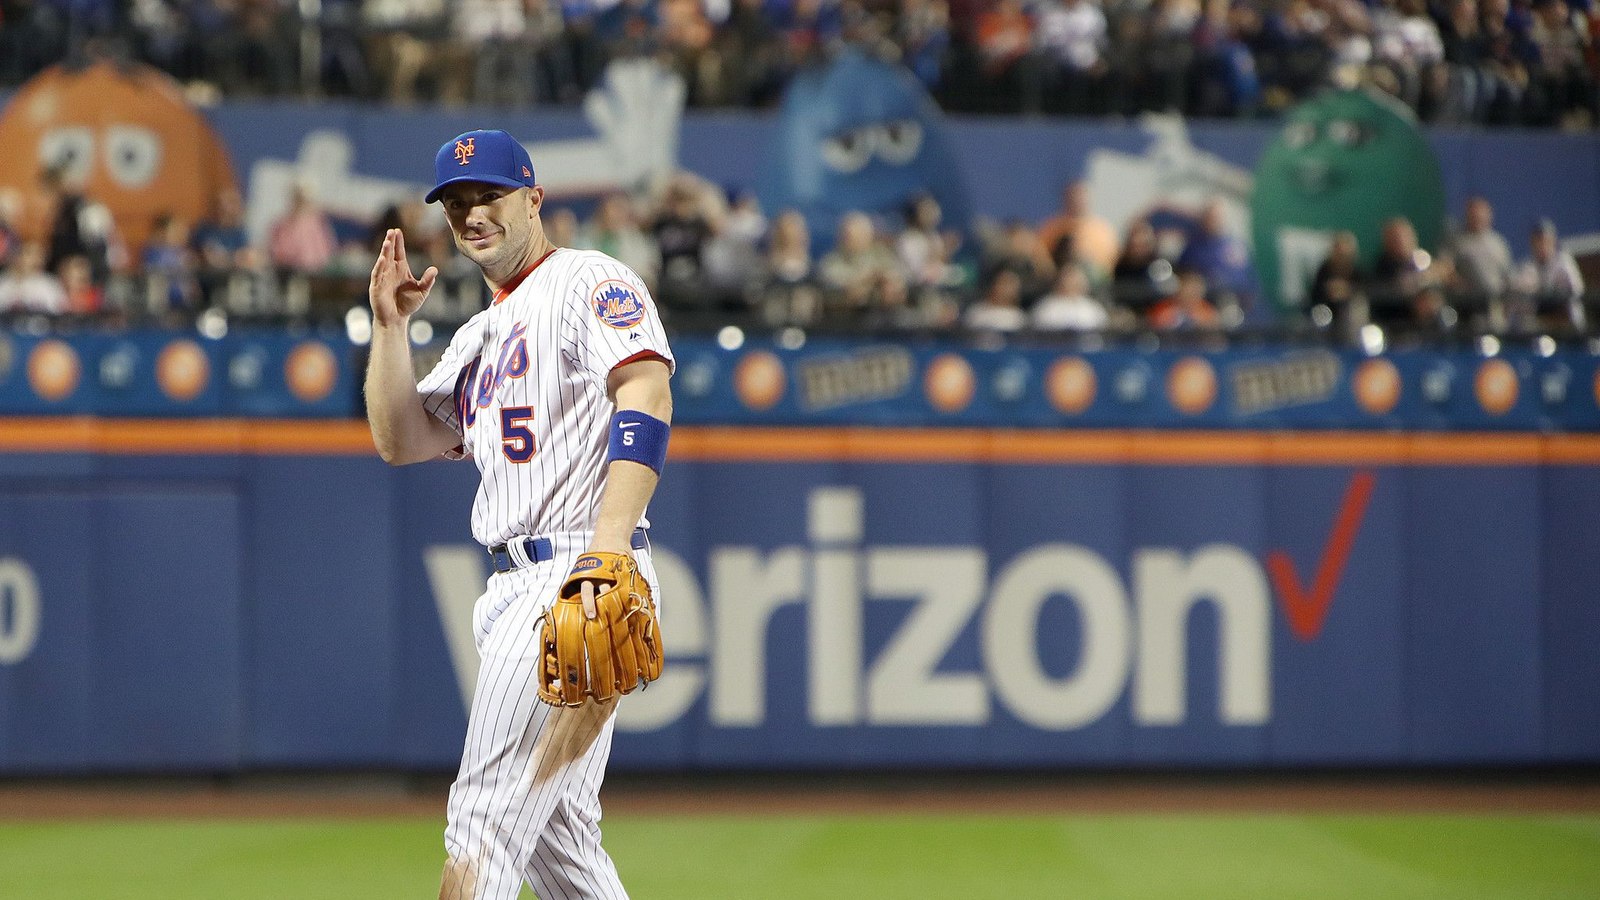 New York Mets Player David Wright Announced He's Retiring Due to